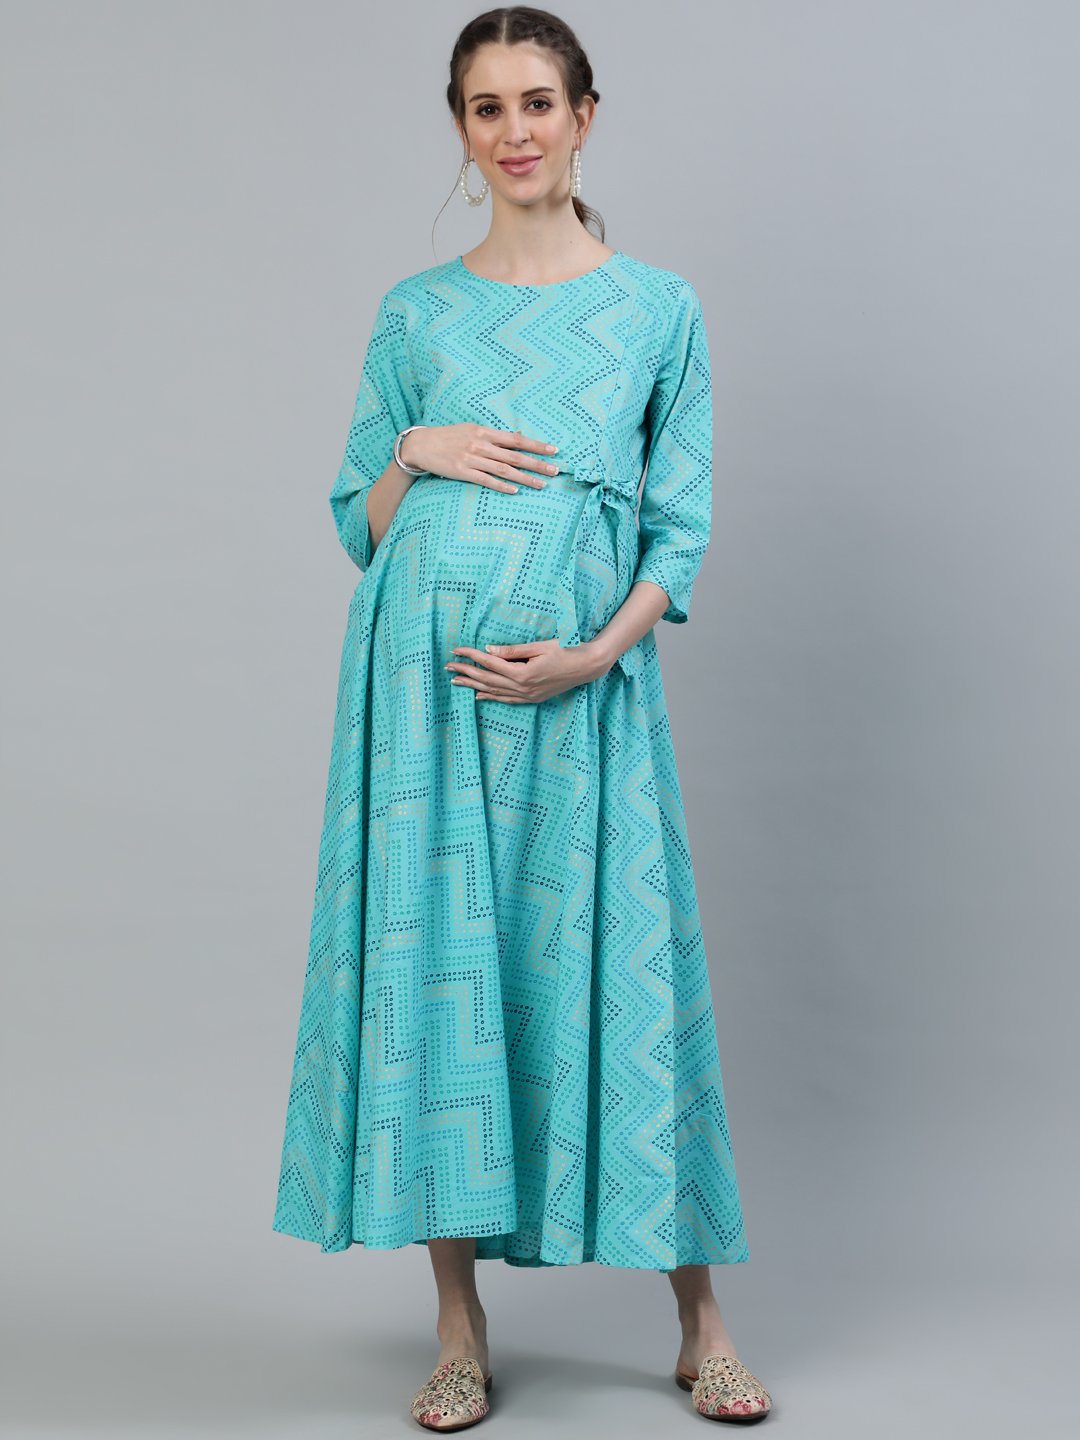 Women's Blue Printed Maternity Dress With Three Quarter Sleeves - Nayo Clothing